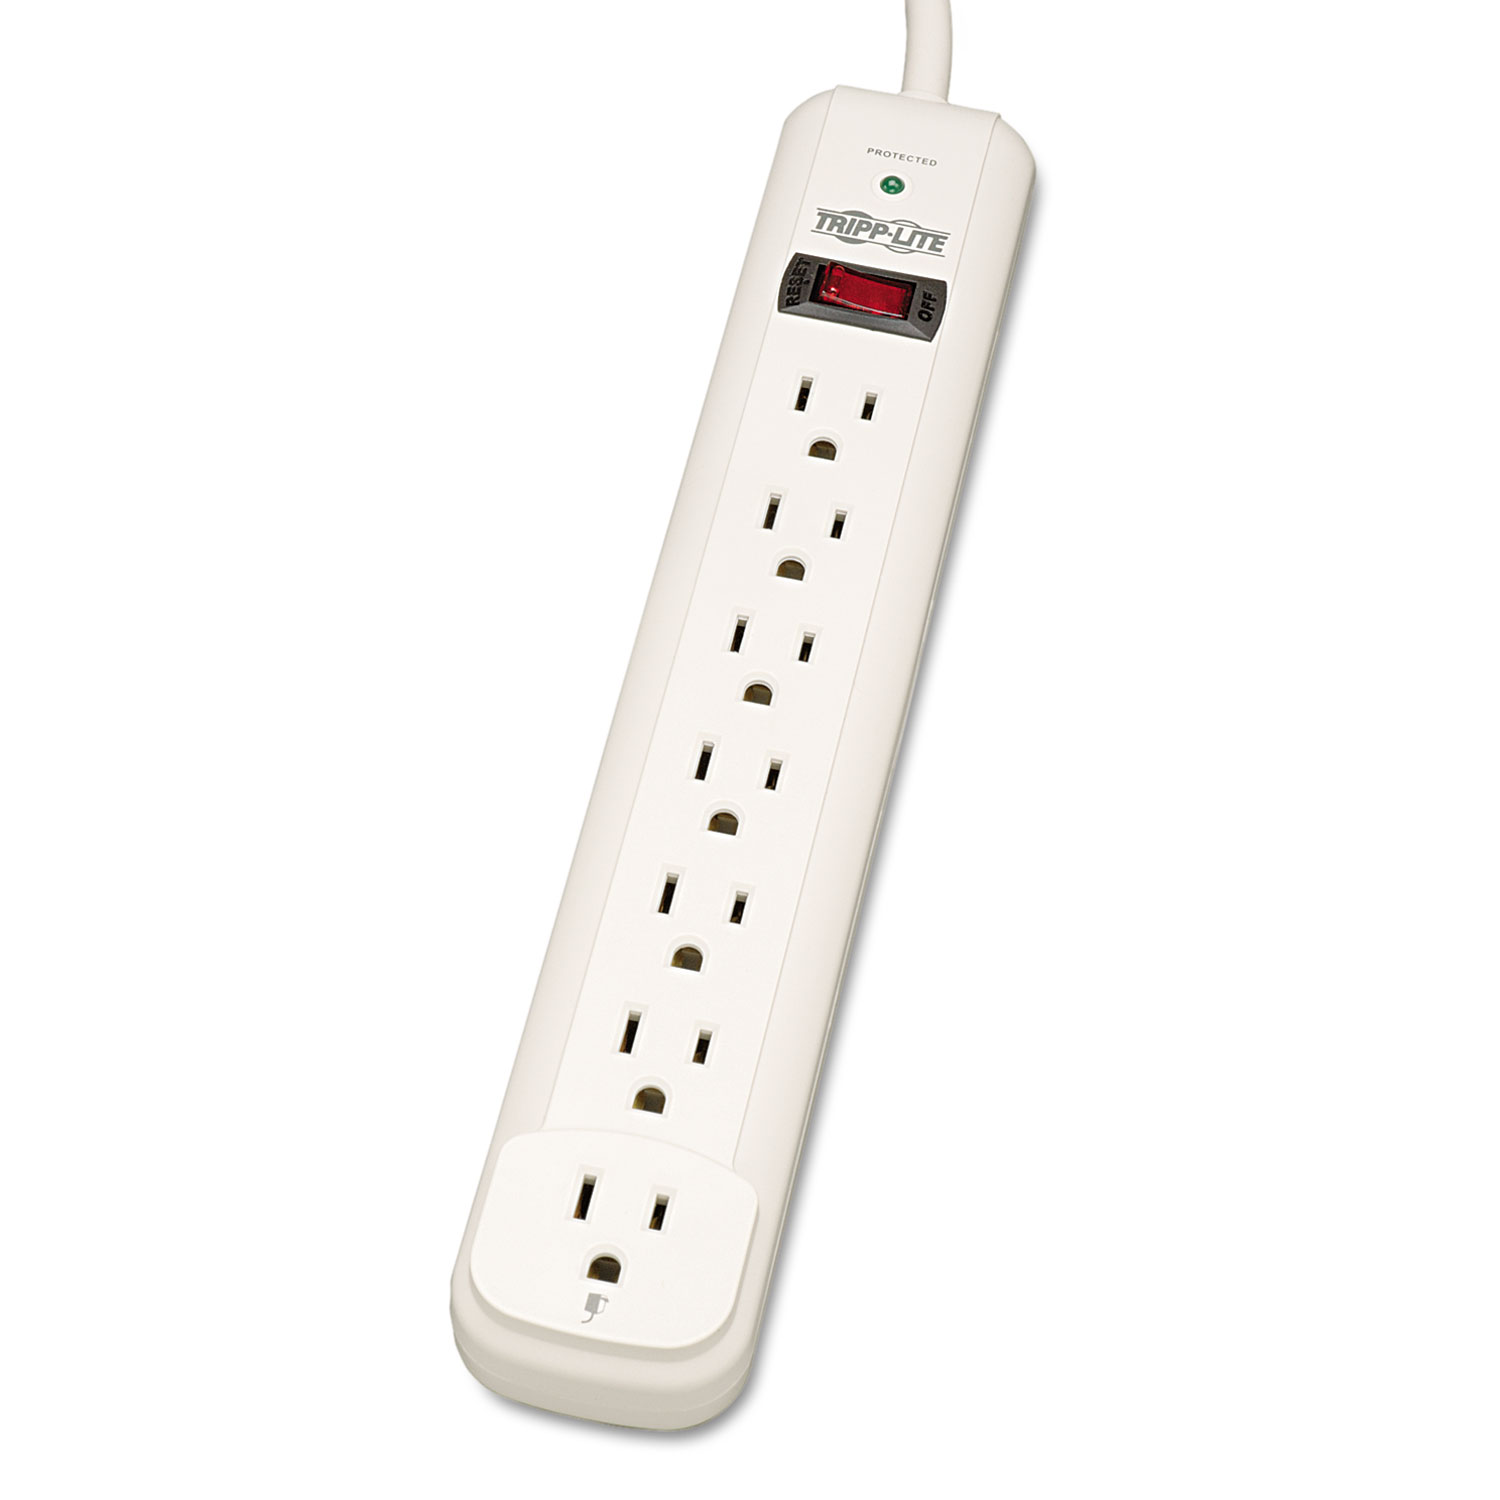  Tripp Lite TLP725 Protect It! Surge Protector, 7 Outlets, 25 ft. Cord, 1080 Joules, Light Gray (TRPTLP725) 